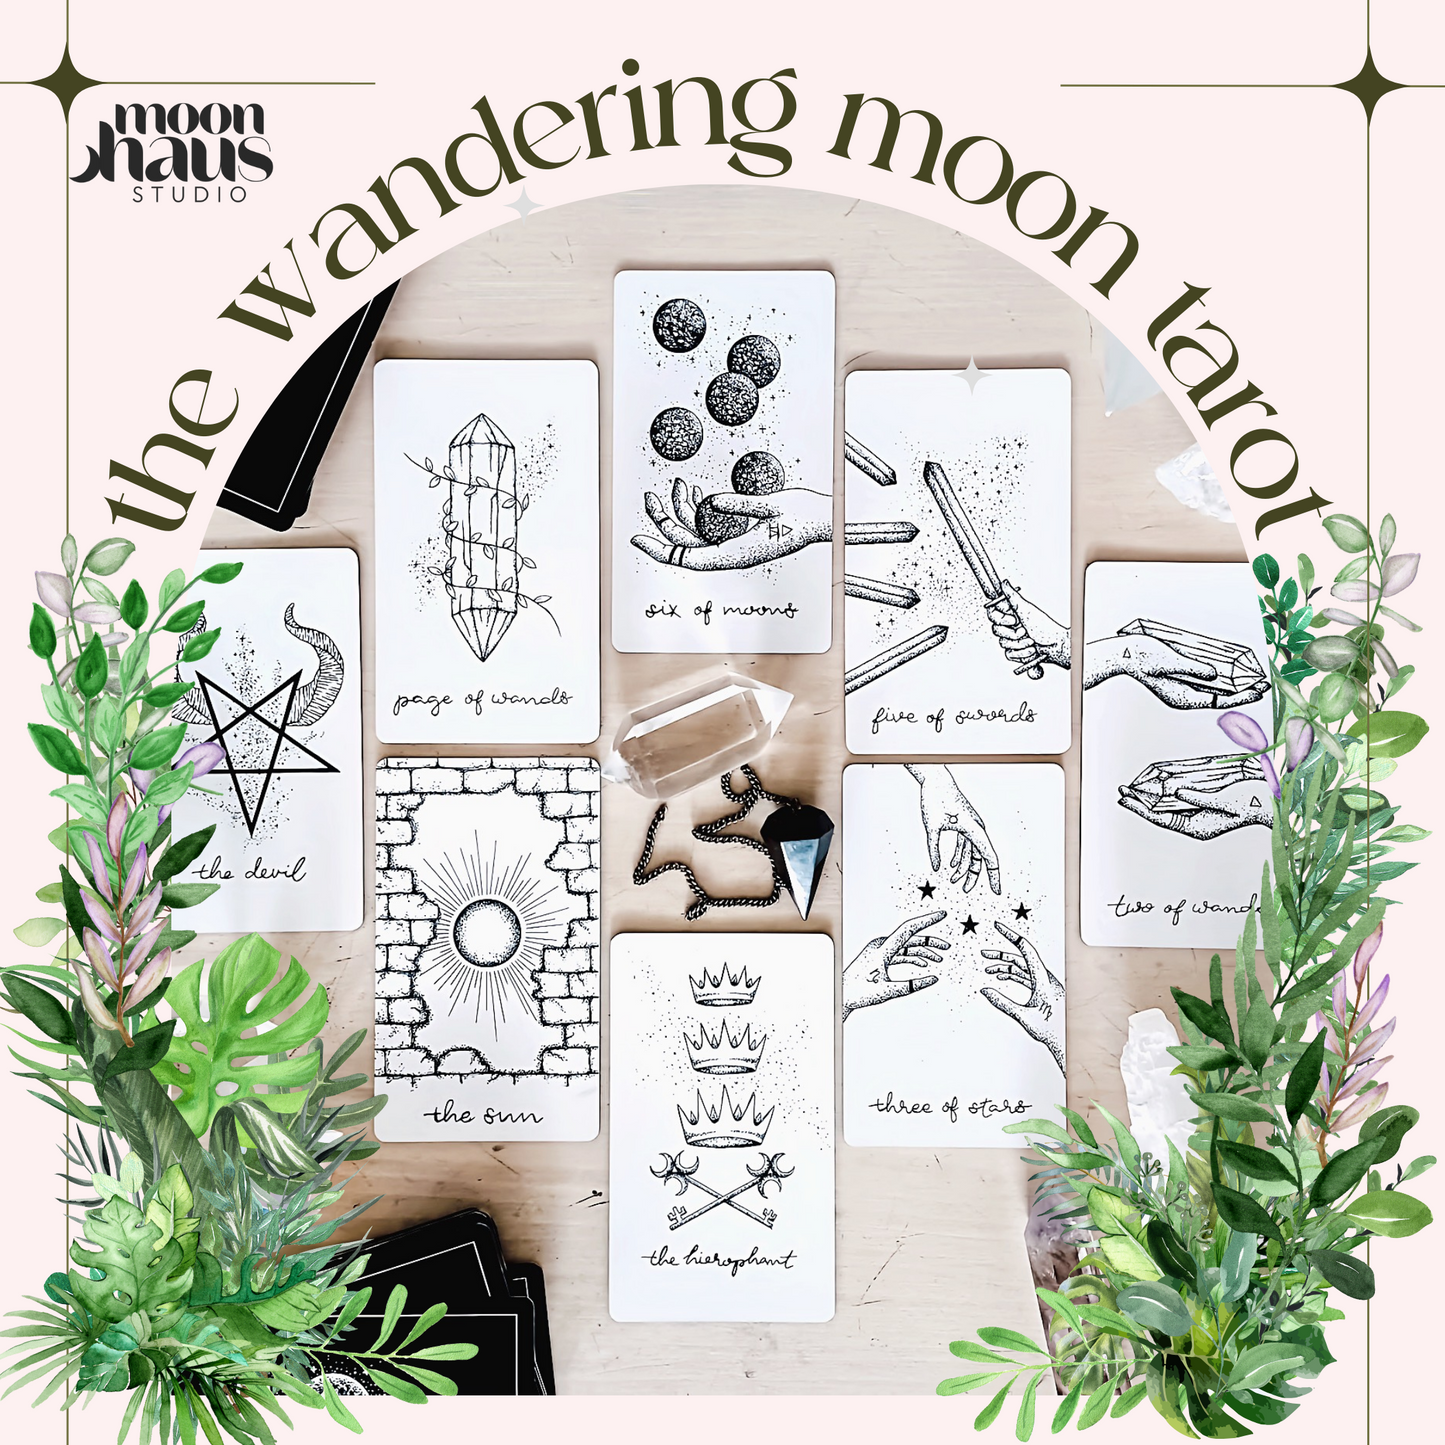 the wandering moon tarot deck - holographic, hand illustrated cards - indie tarot deck with guidebook - beginner tarot deck